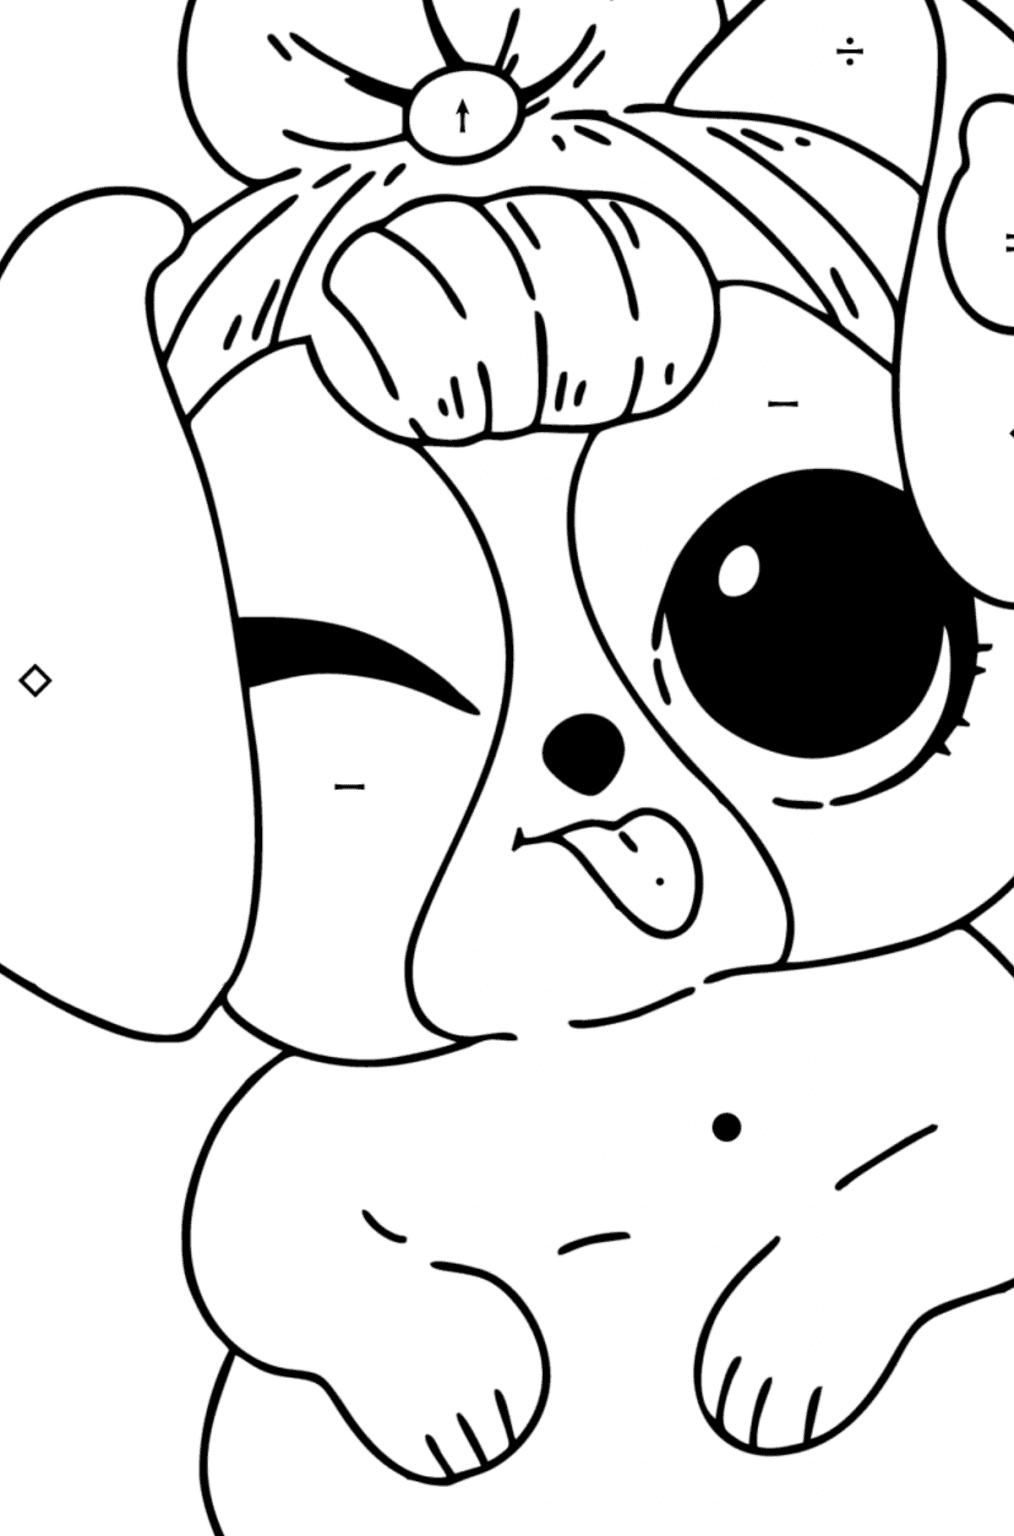 Coloring page LOL pet cute puppy - Online and Print for Free!